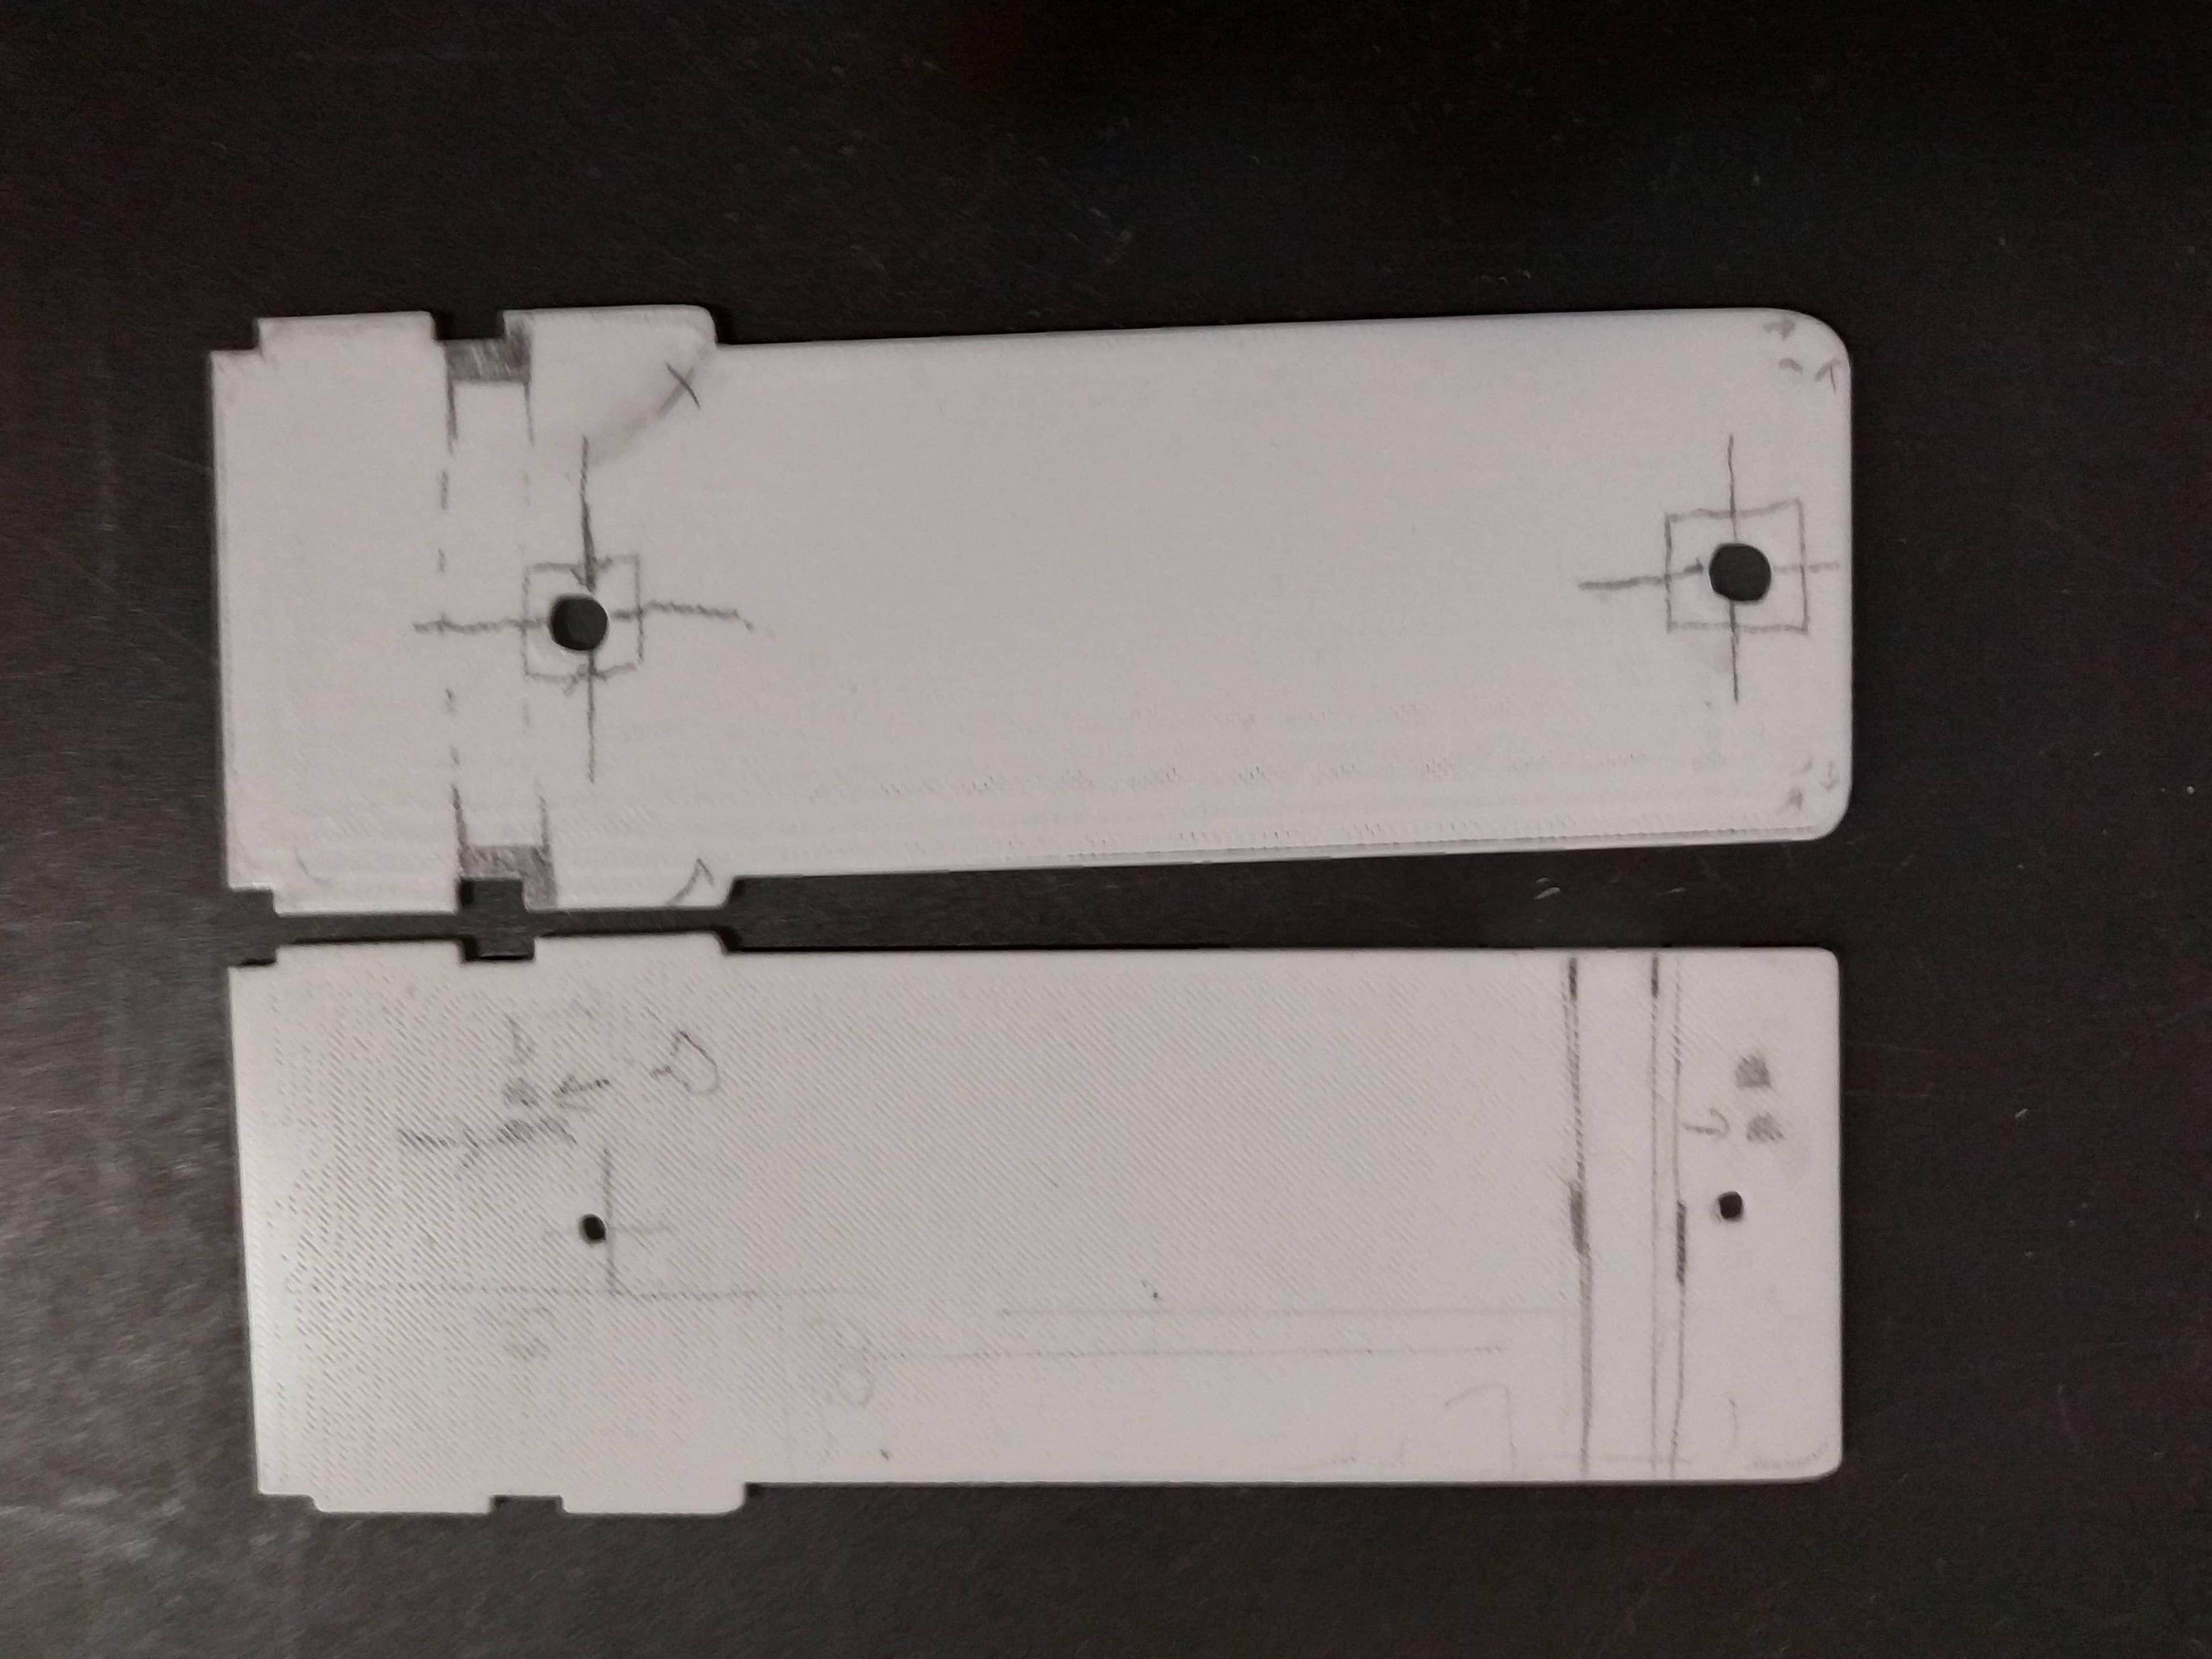 Two white plastic parts side-by-side each other, with pencil markings indicating proposed changes to the design